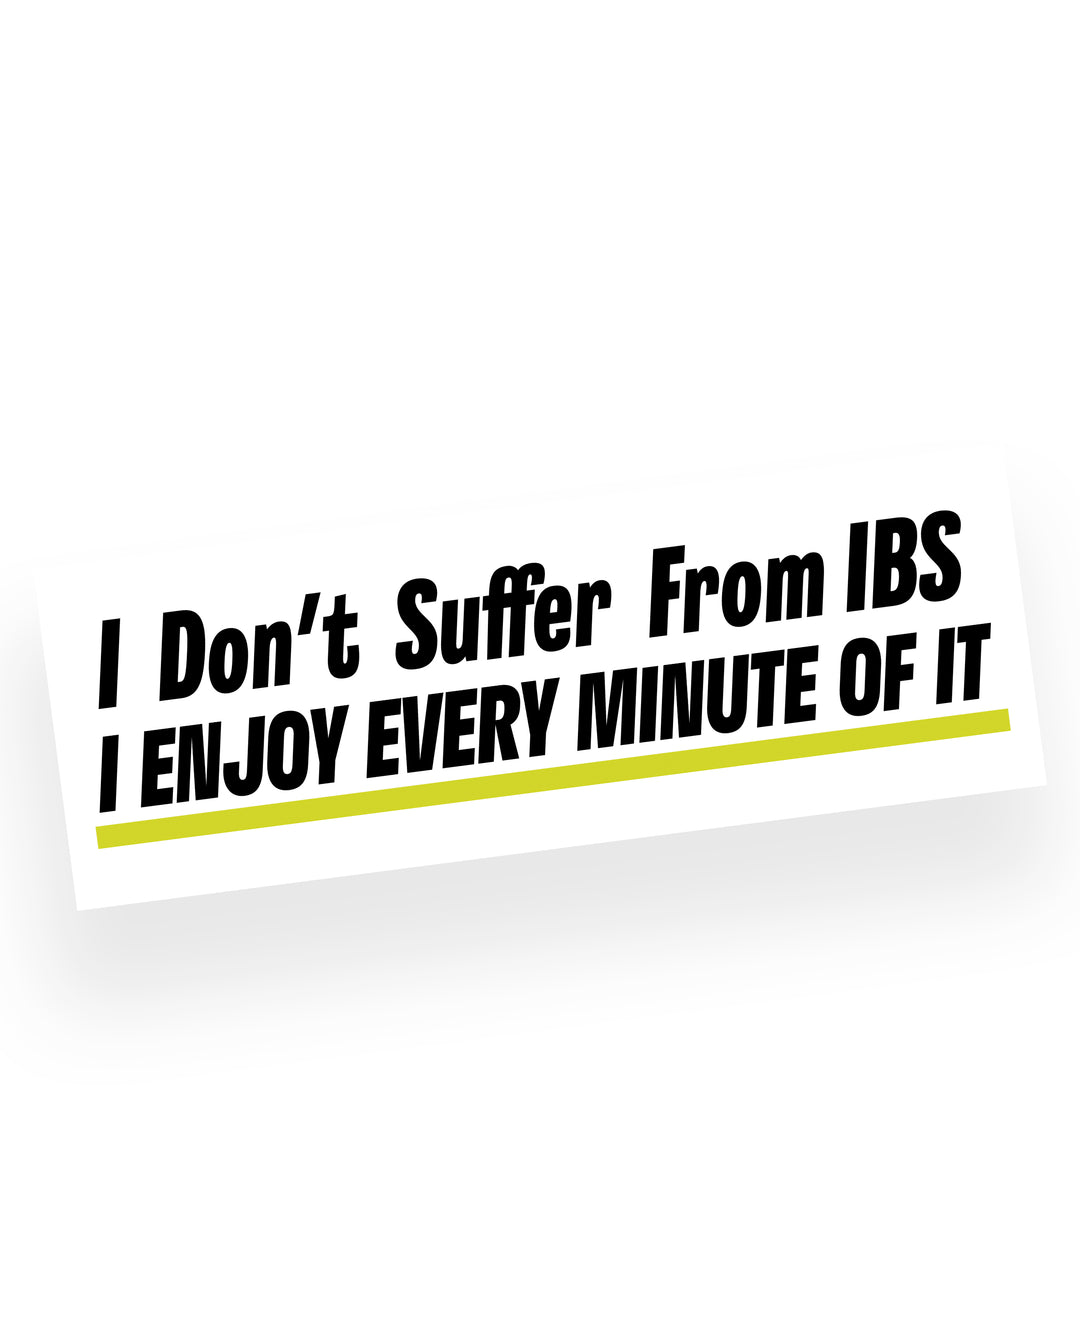 I Don't Suffer from IBS... I Enjoy Every Minute Of It - Silly IBS sticker